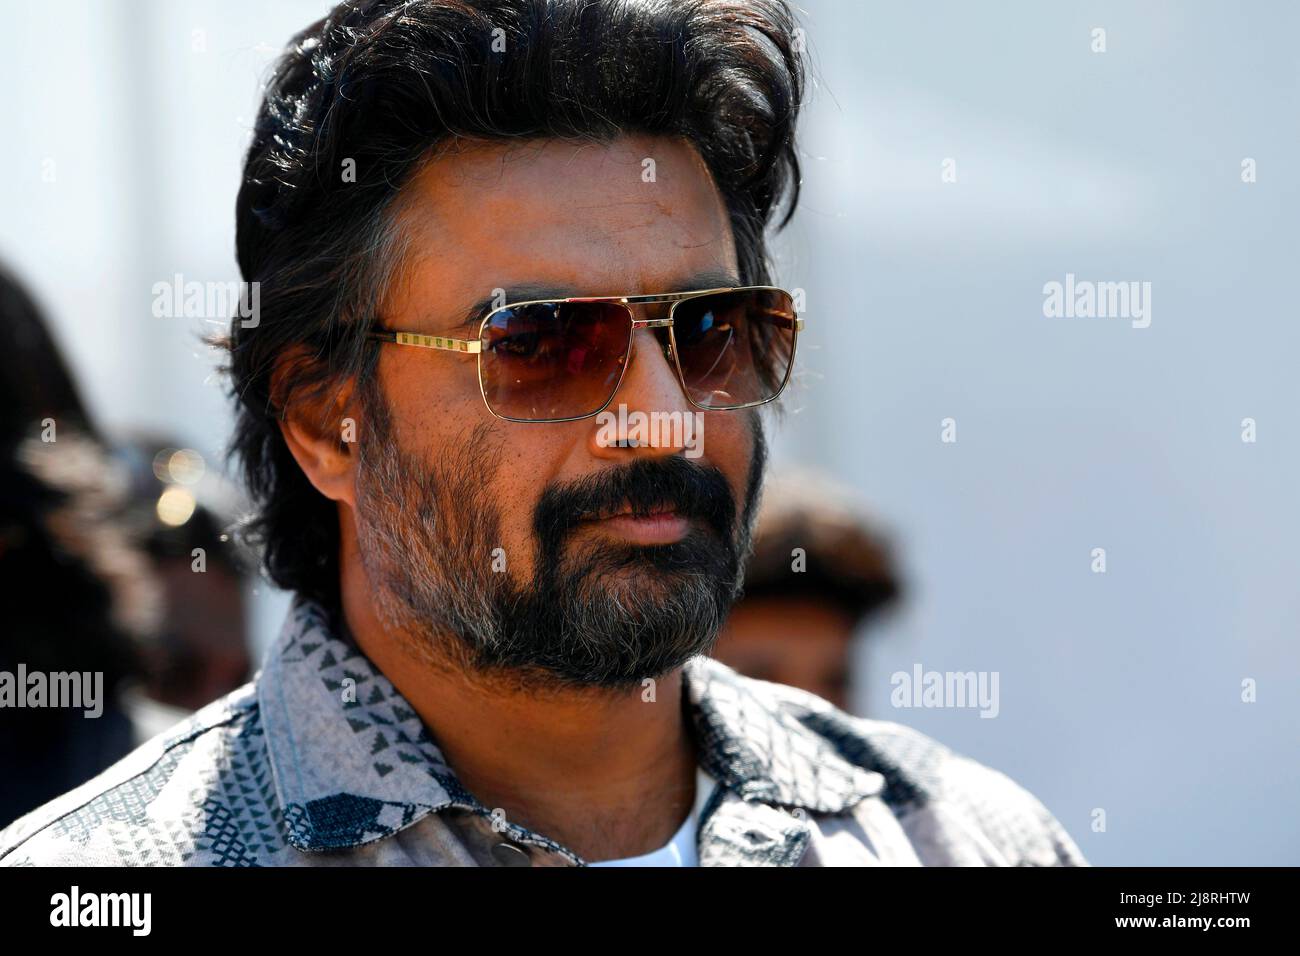 The 75th Cannes Film Festival - Cannes, France, May 18, 2022. Actor R. Madhavan is seen on the Croisette as India is the Country of Honour at Marche du Film (Film Market). REUTERS/Piroschka Van De Wouw Stock Photo